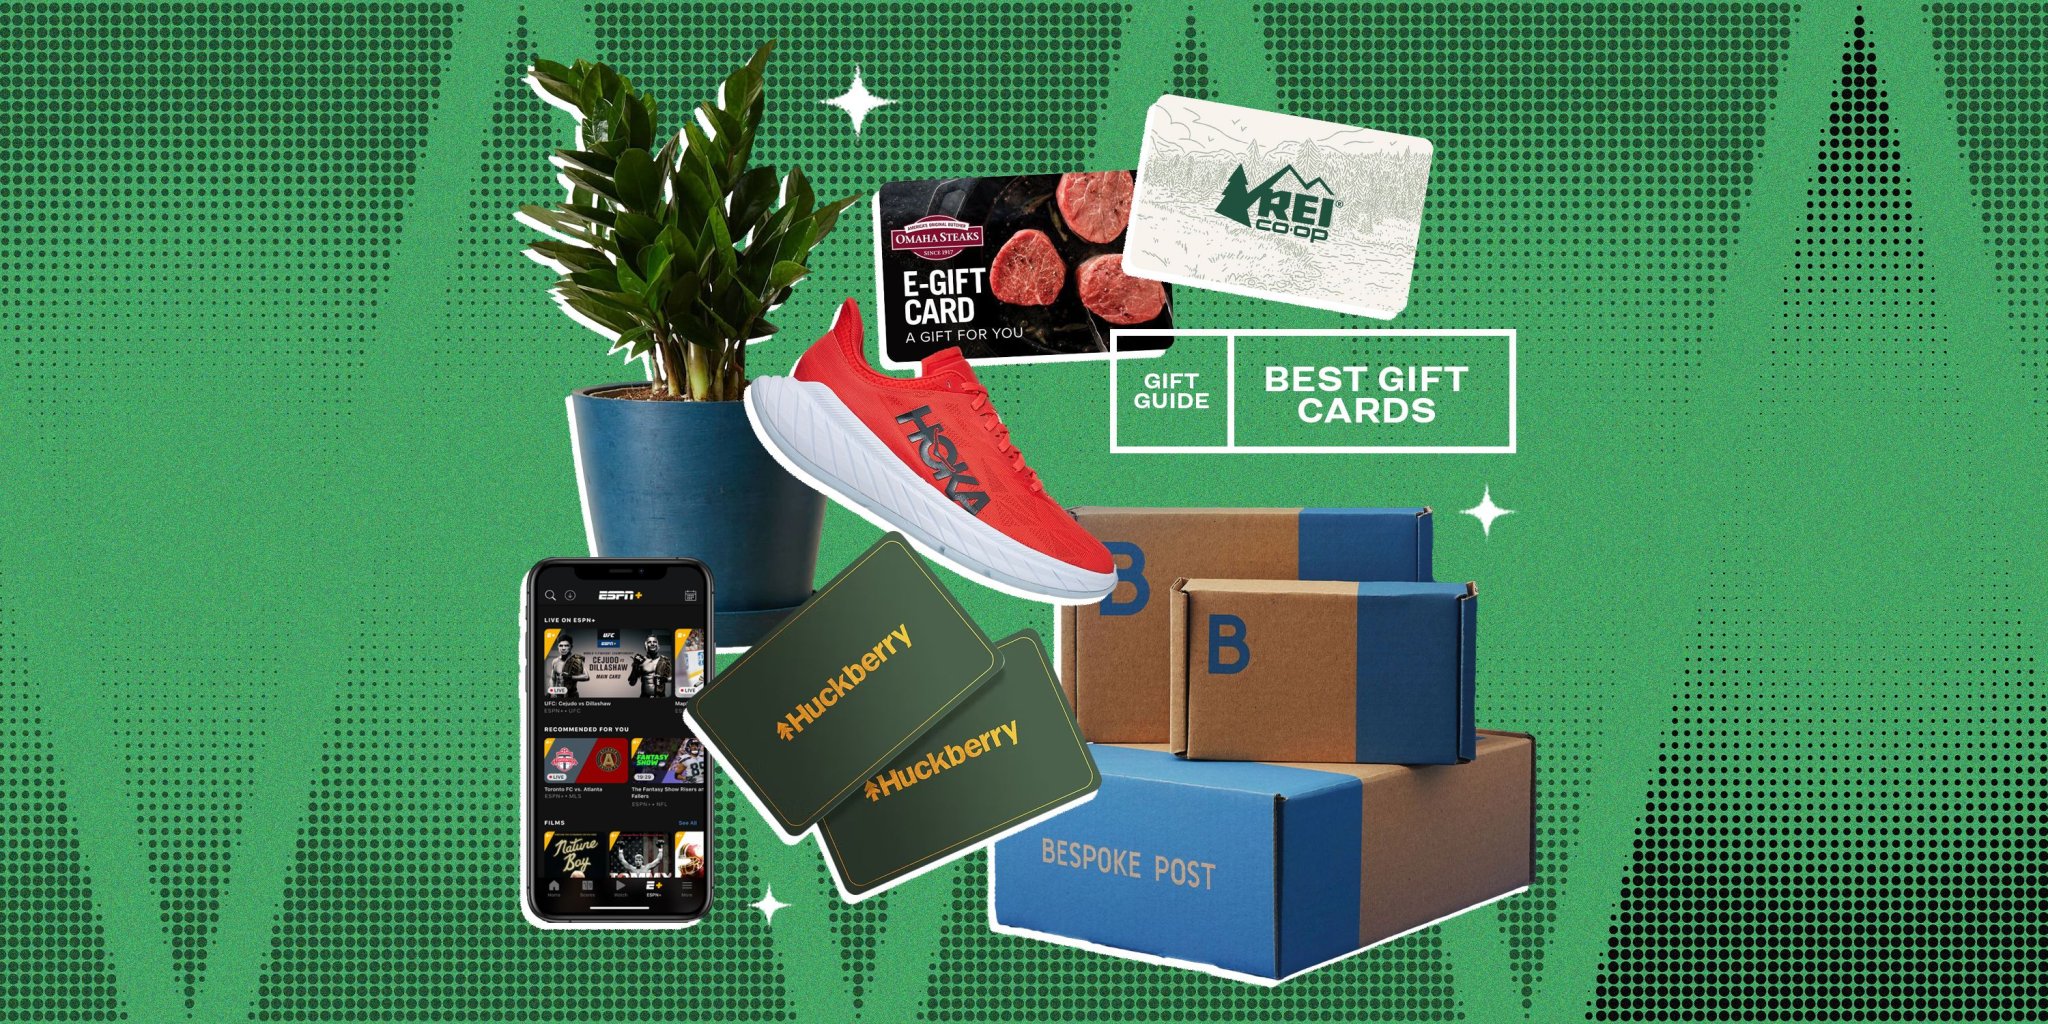 Need a Last-Minute Gift? Here Are the Best Gift Cards for Men